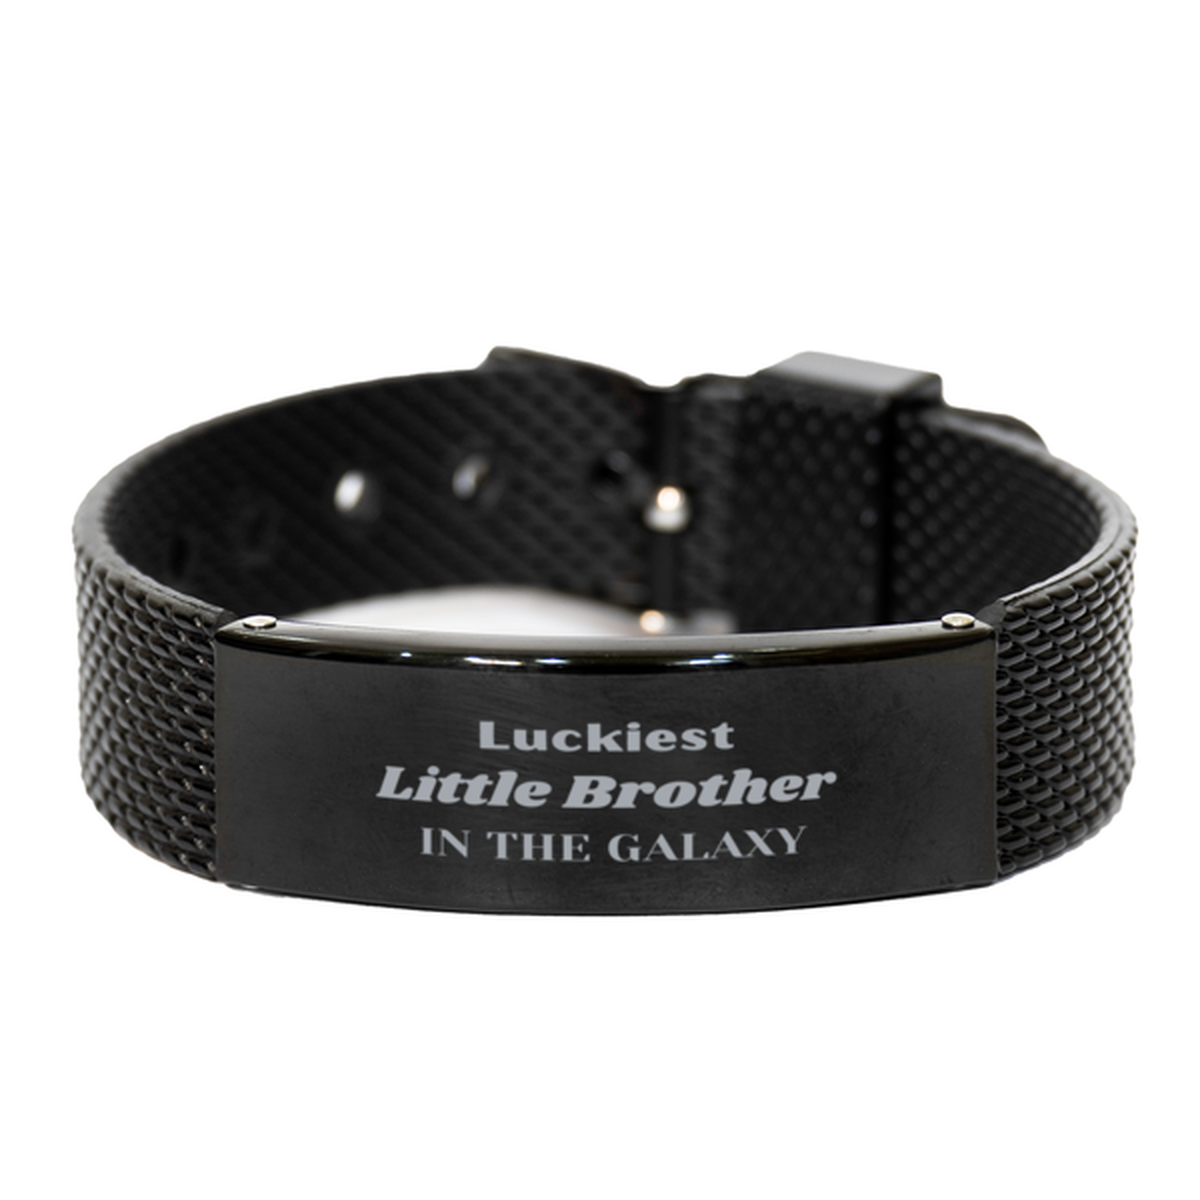 Luckiest Little Brother in the Galaxy, To My Little Brother Engraved Gifts, Christmas Little Brother Black Shark Mesh Bracelet Gifts, X-mas Birthday Unique Gifts For Little Brother Men Women